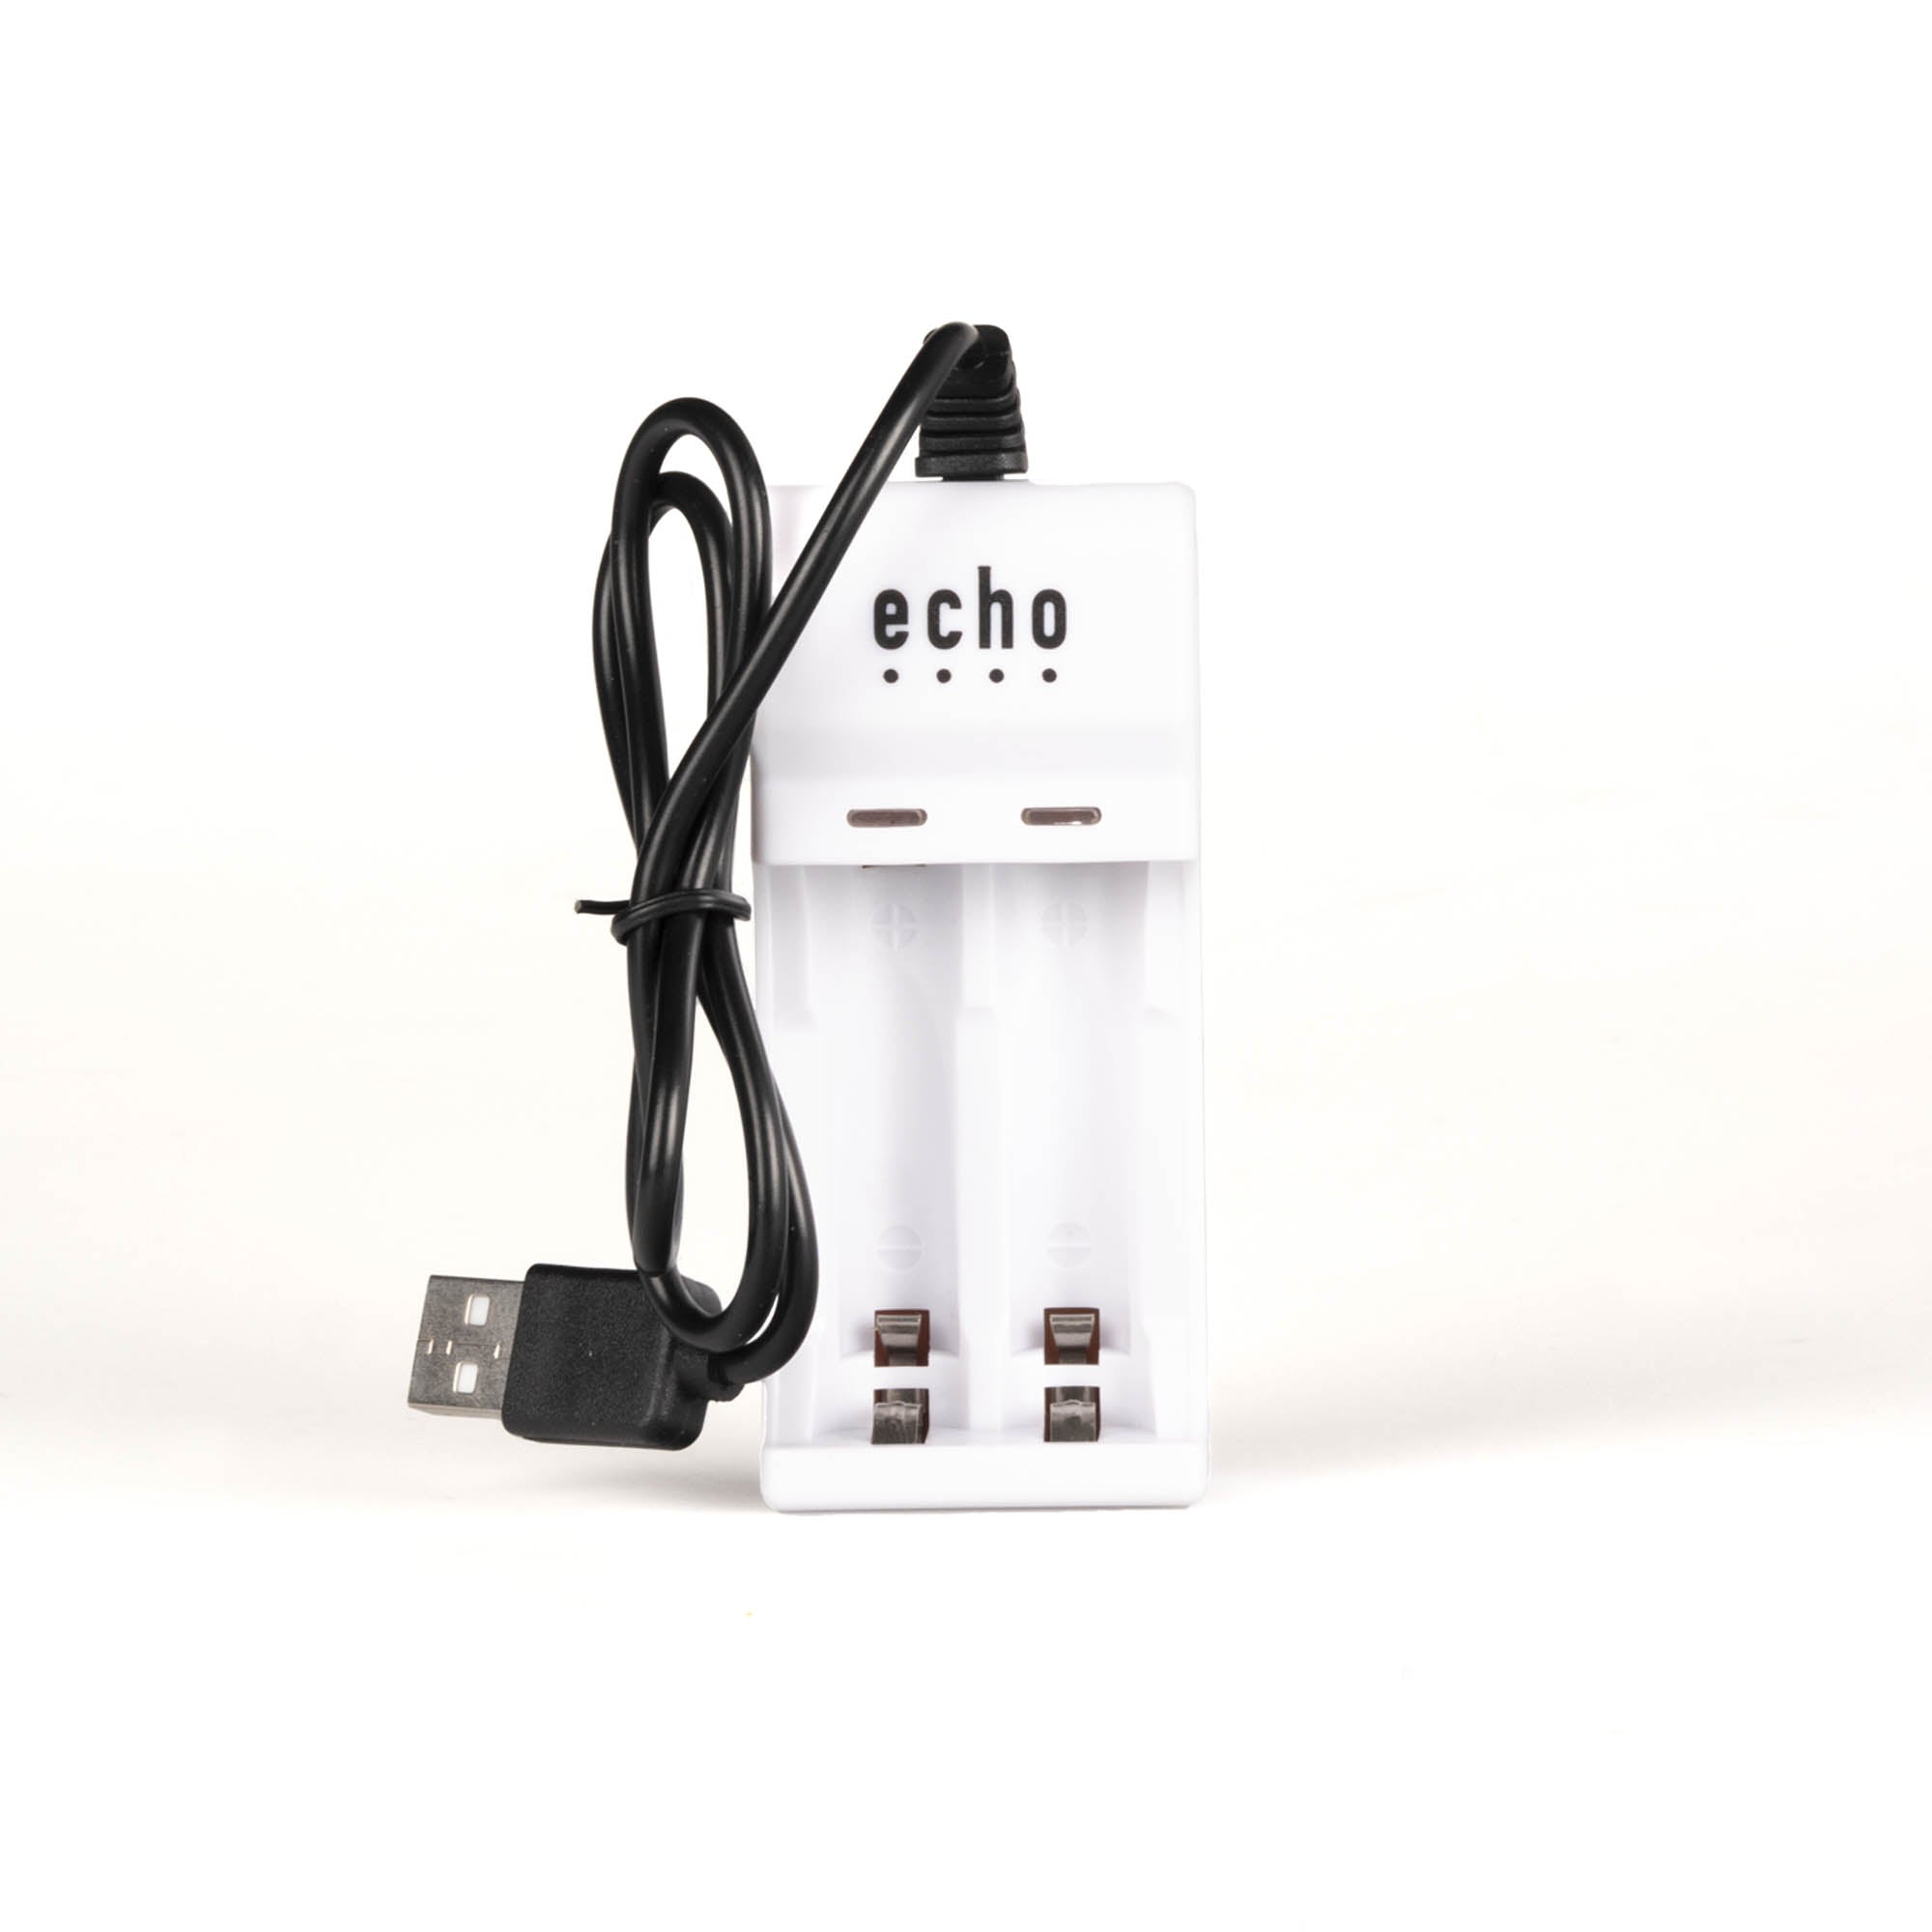 Echo battery charger